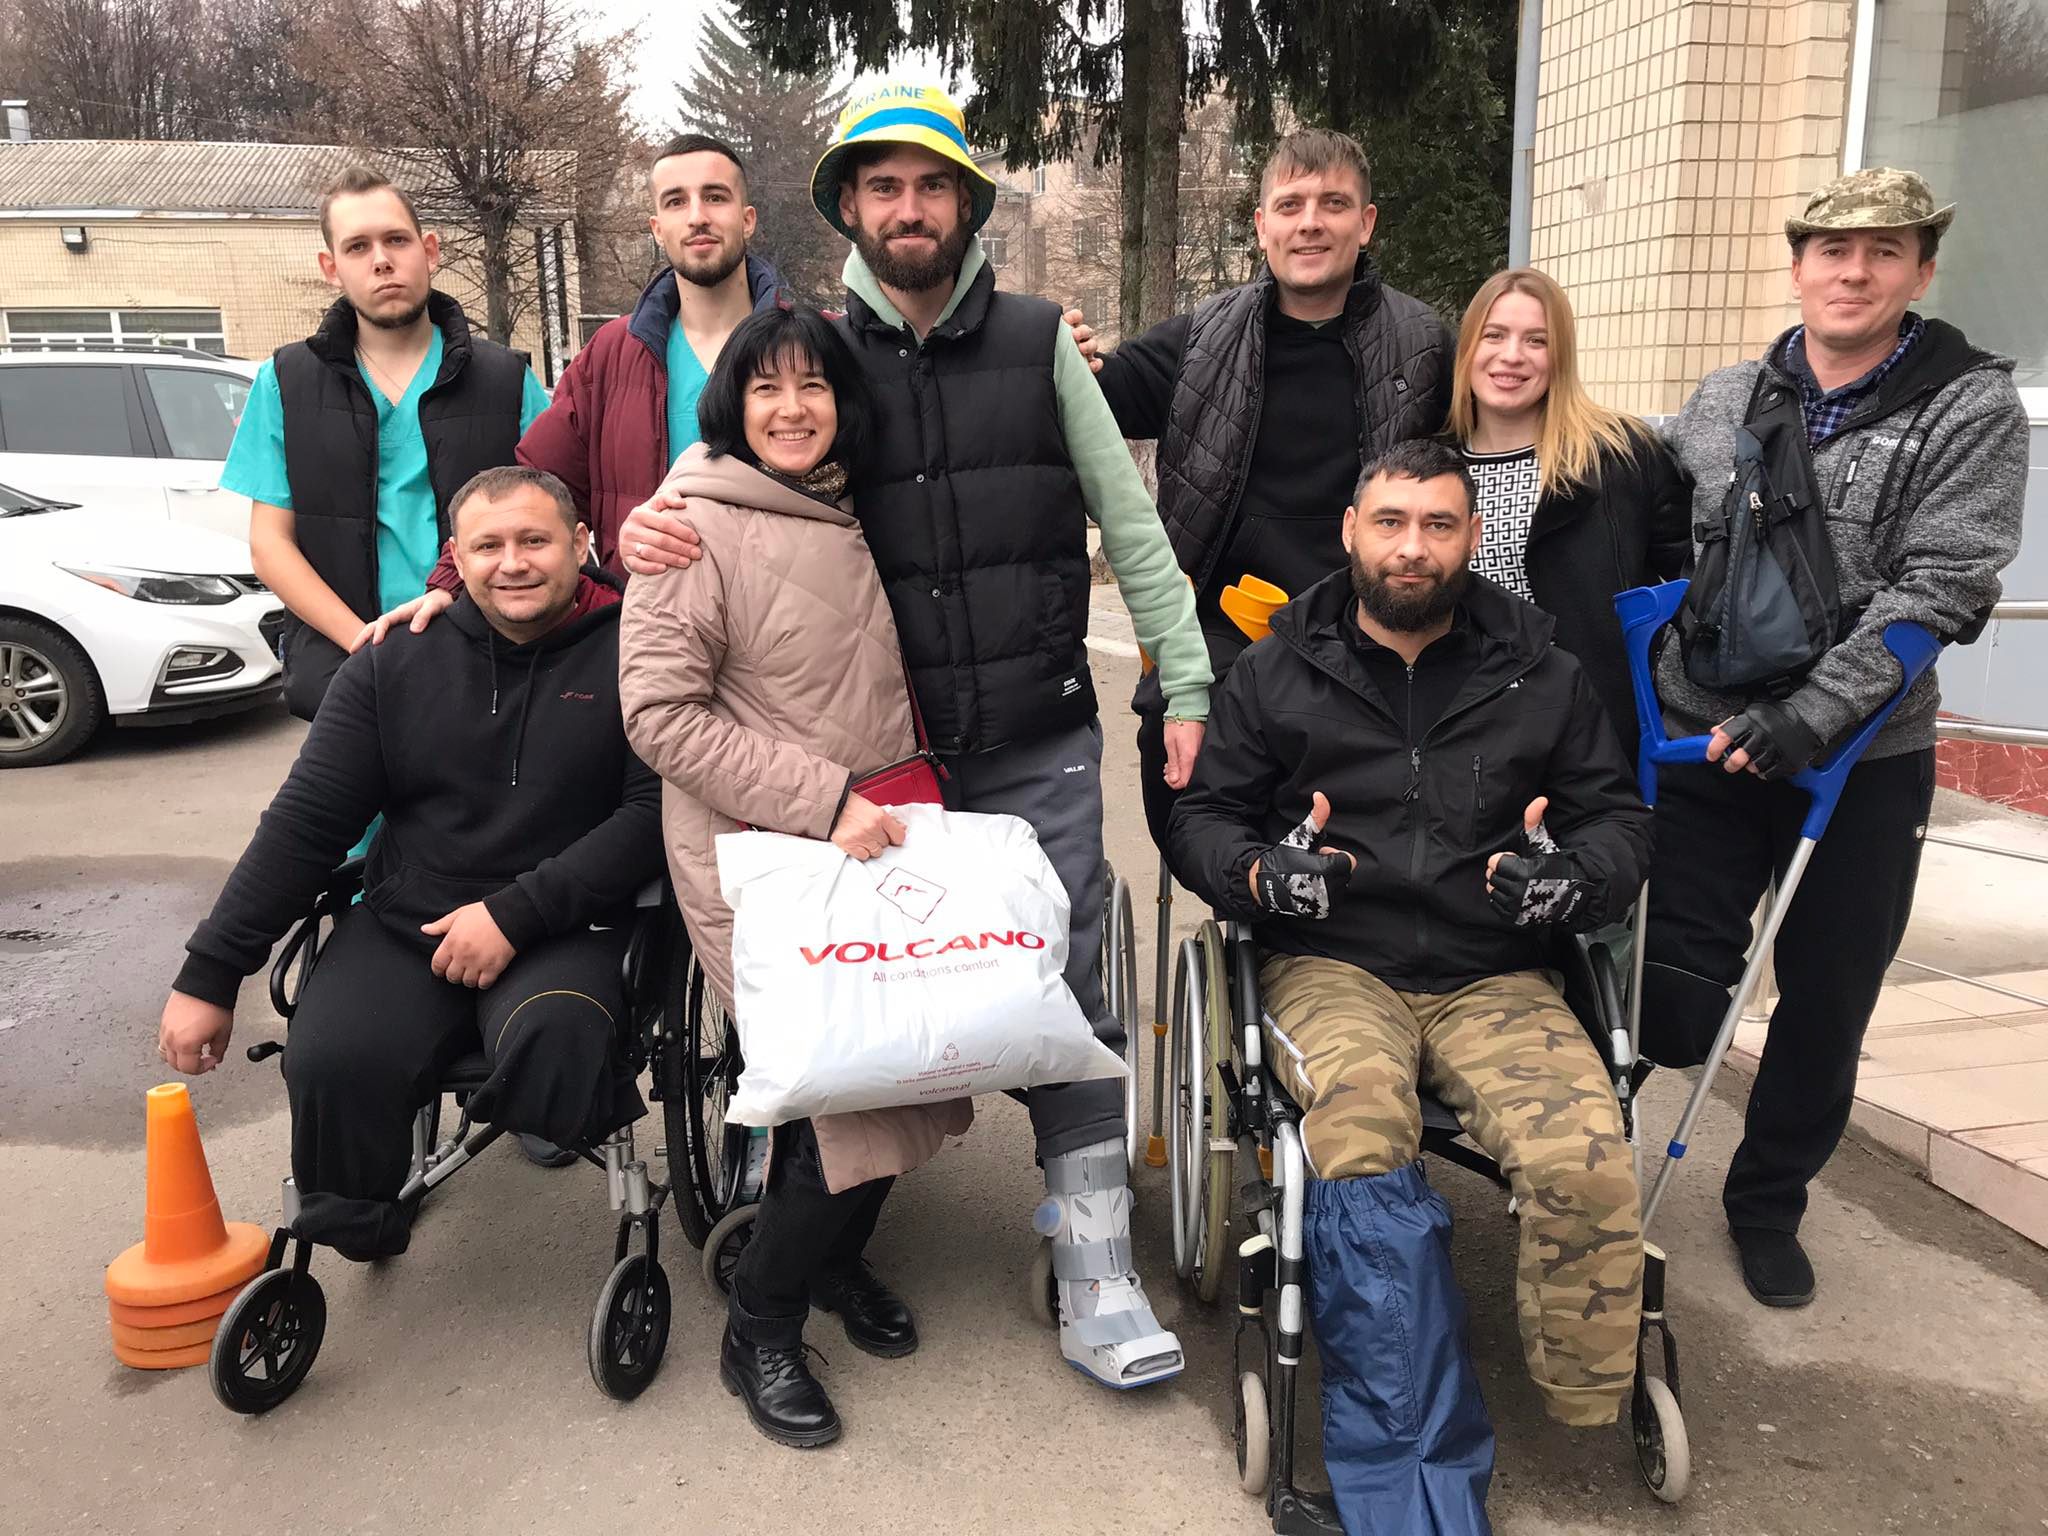 The Vinnytsia Institute for Disability and Rehabilitation Research